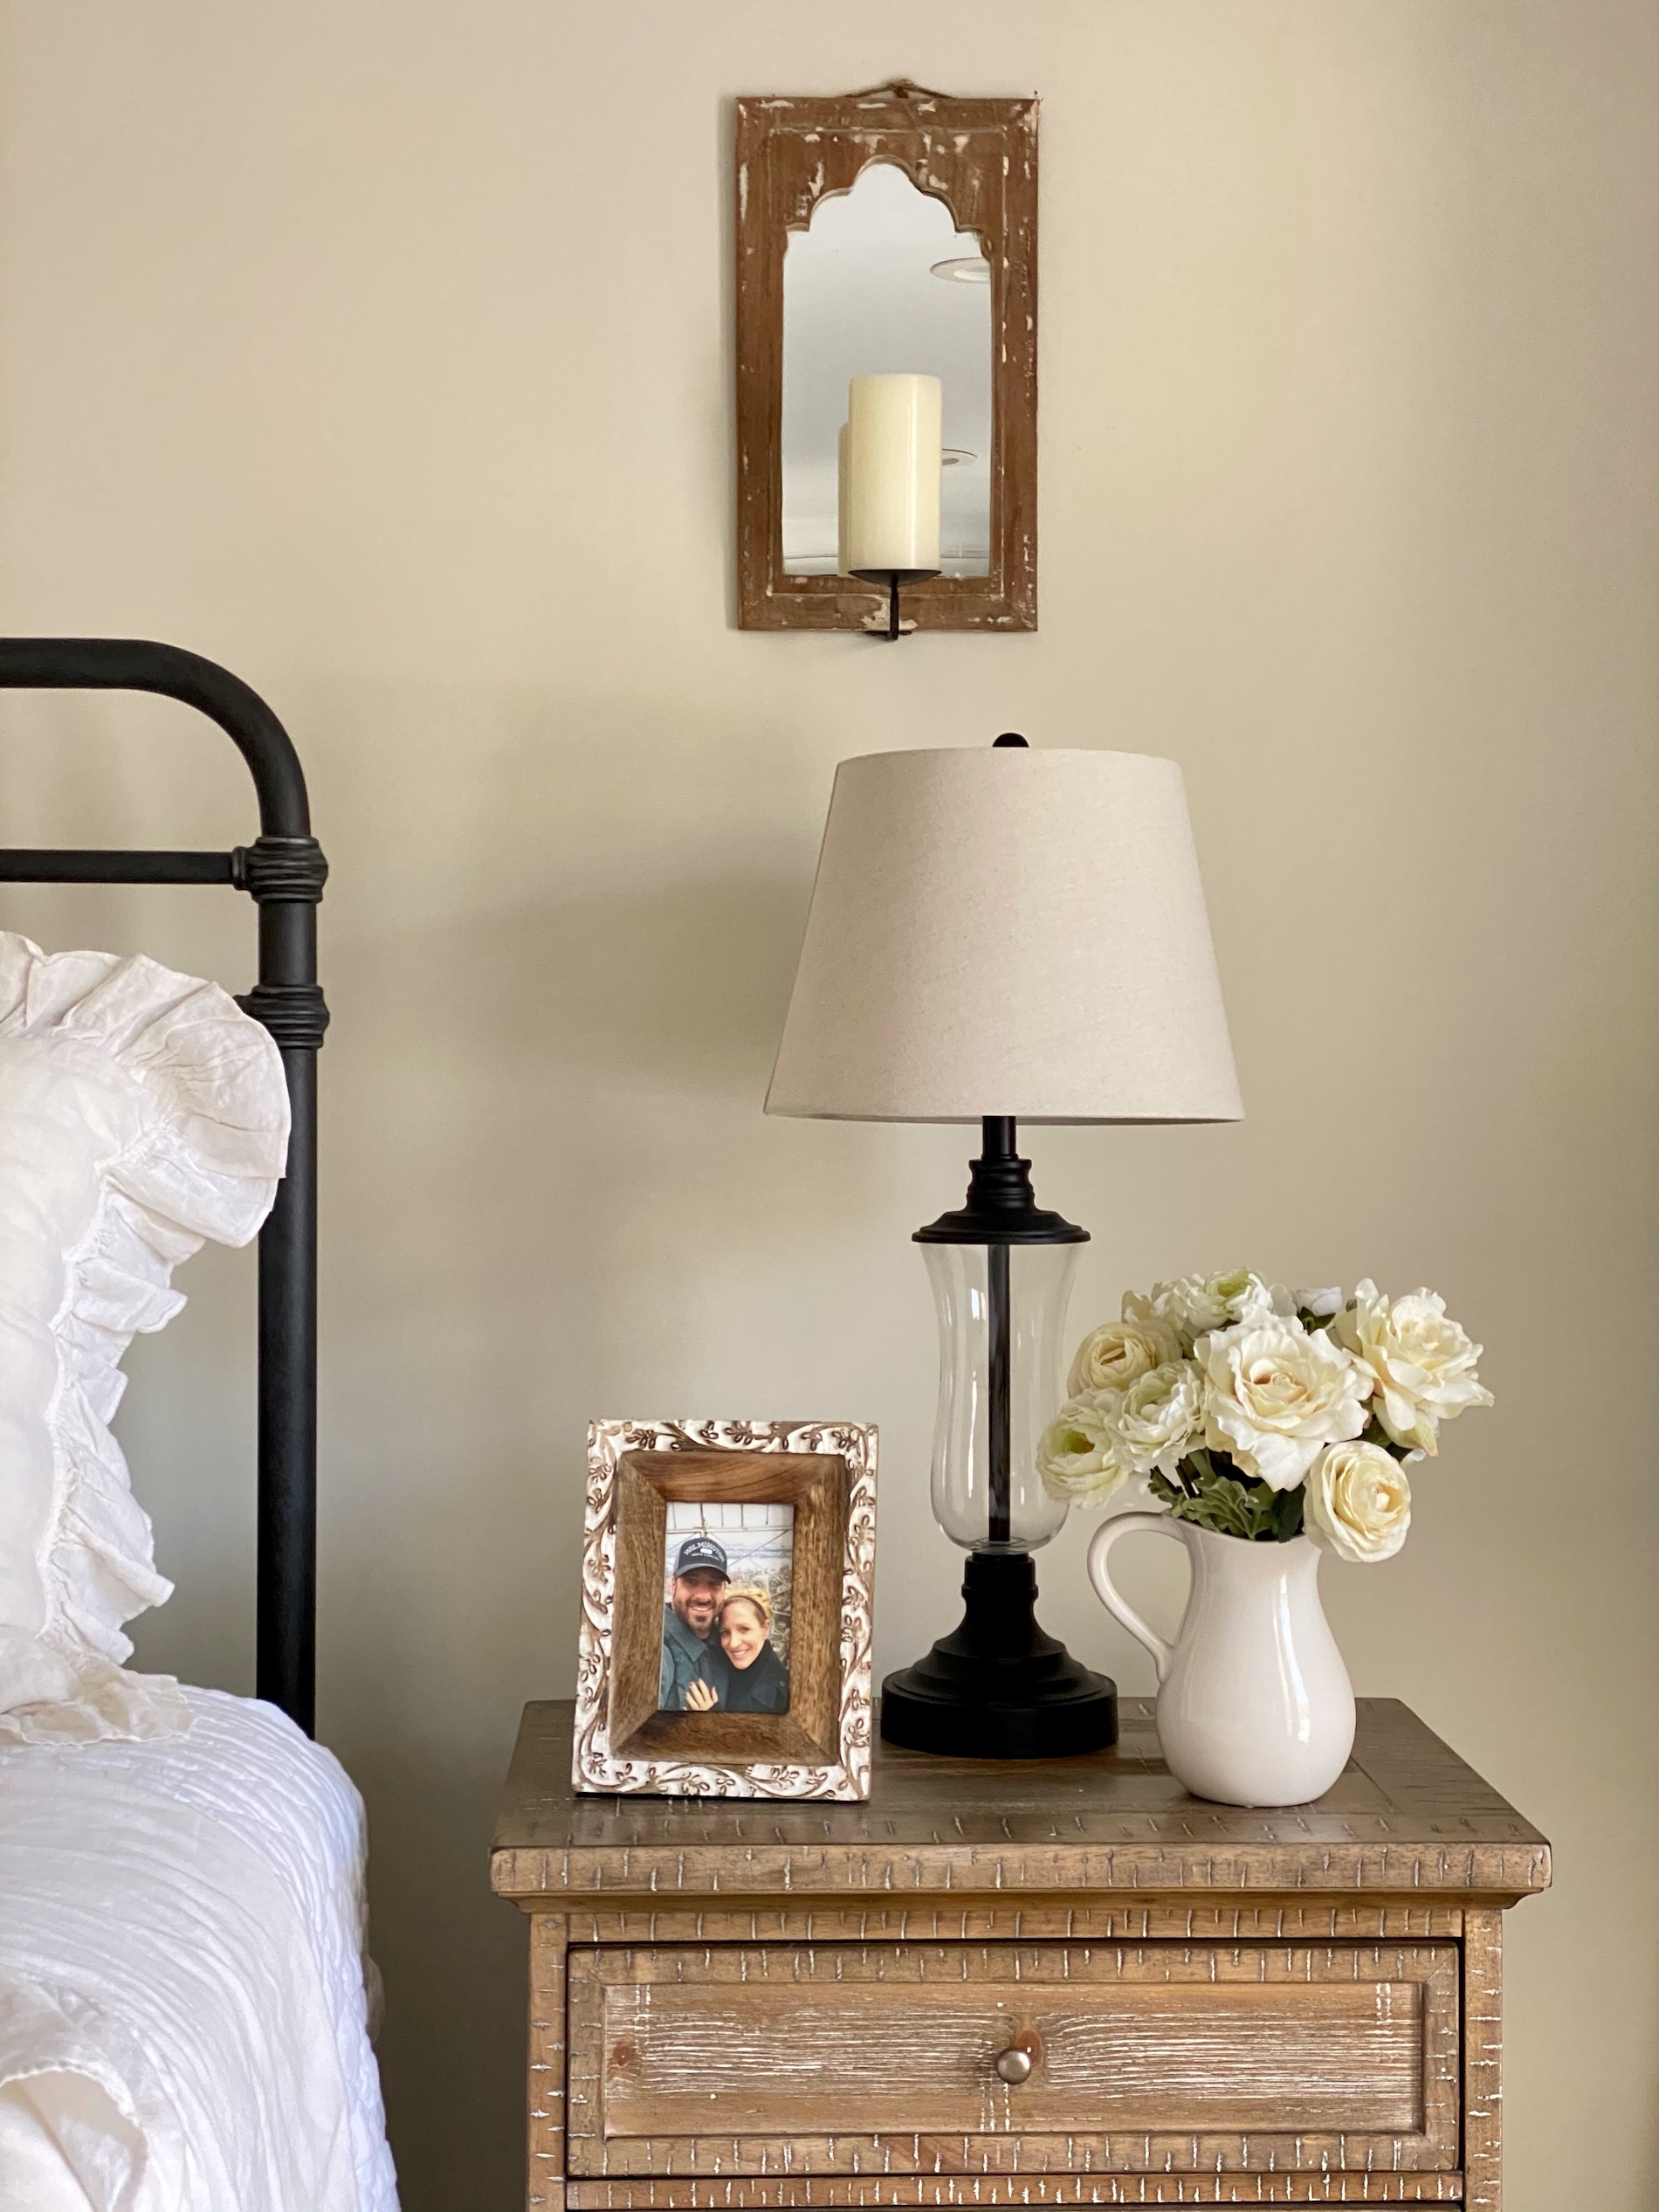 The perfect bedside essentials: bronze and glass table lamp, flowers in a pitcher and a picture frame on a wood nightstand next to the bed.